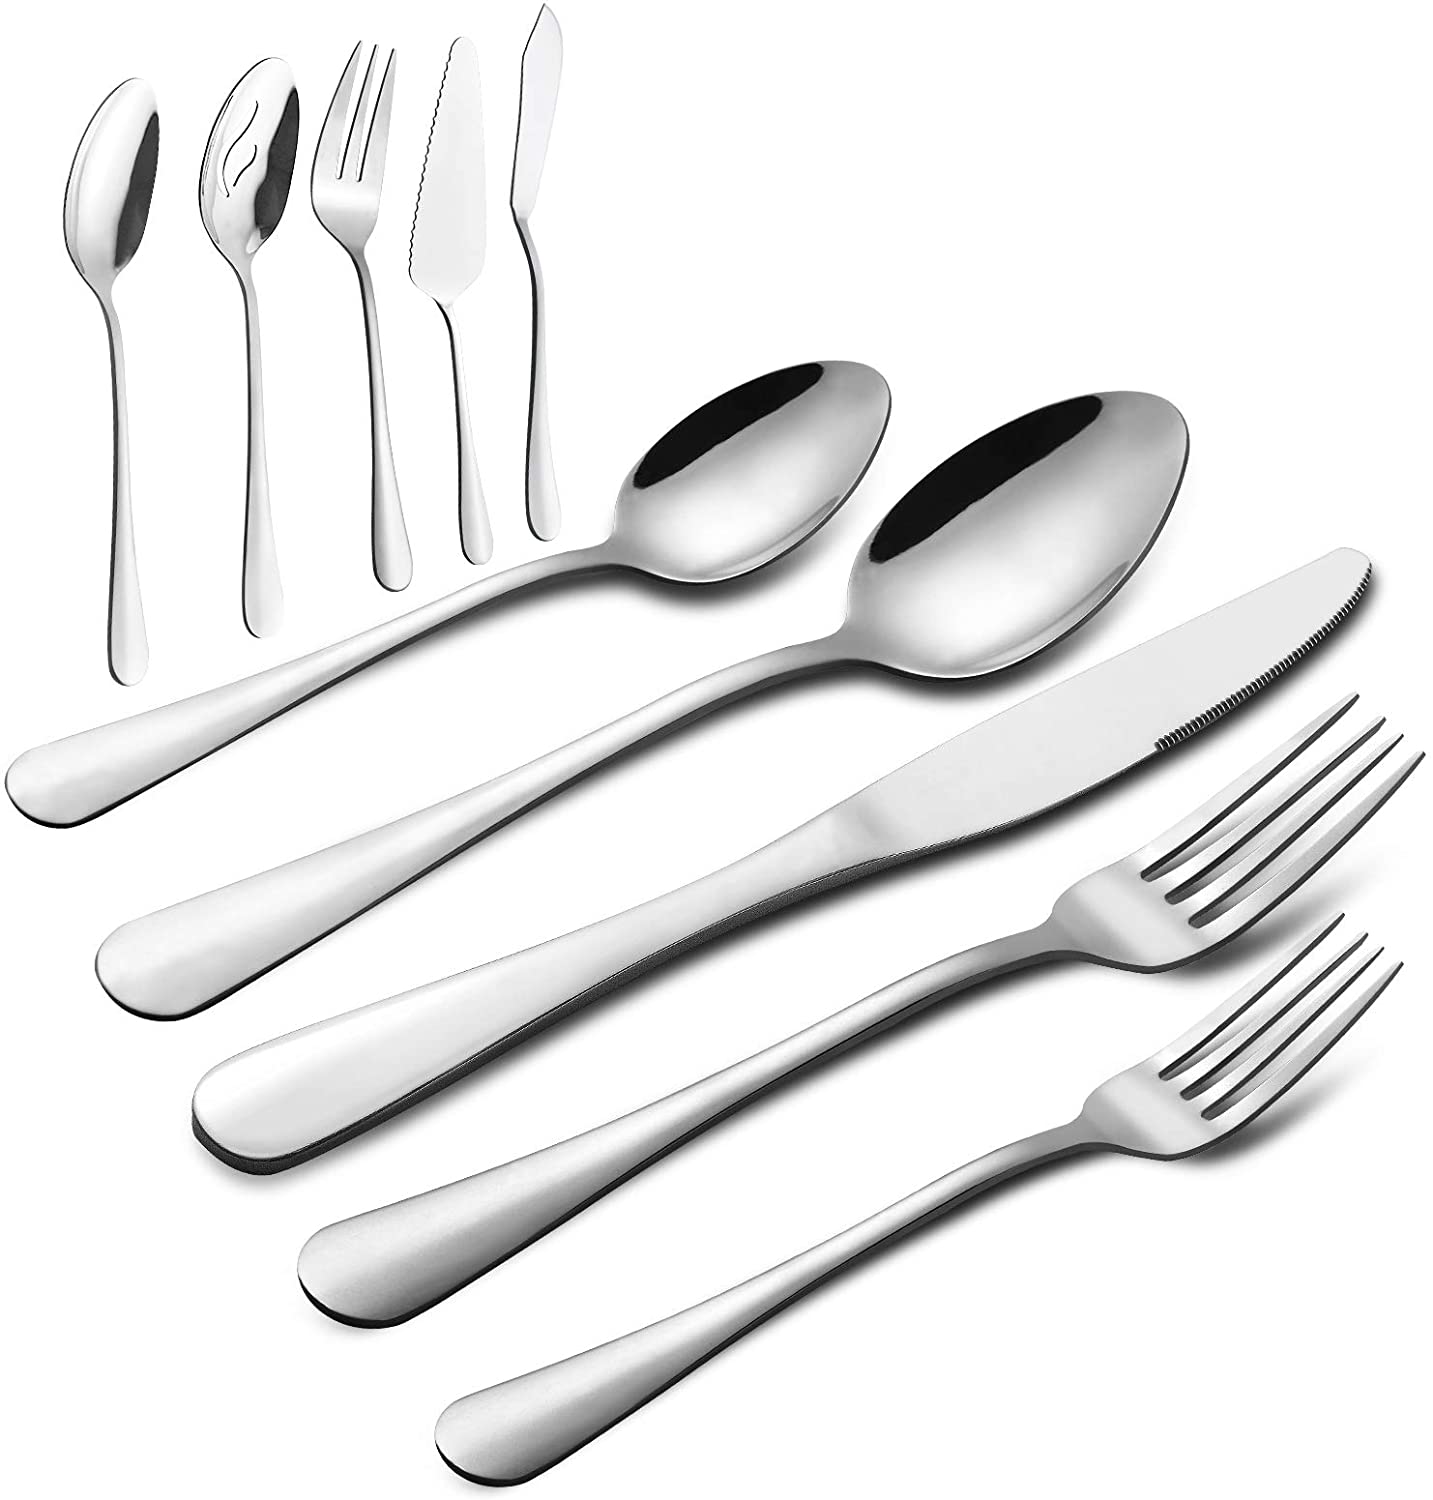 HIWARE Corrosion Resistant Stainless Steel Cutlery Set, 48-Piece